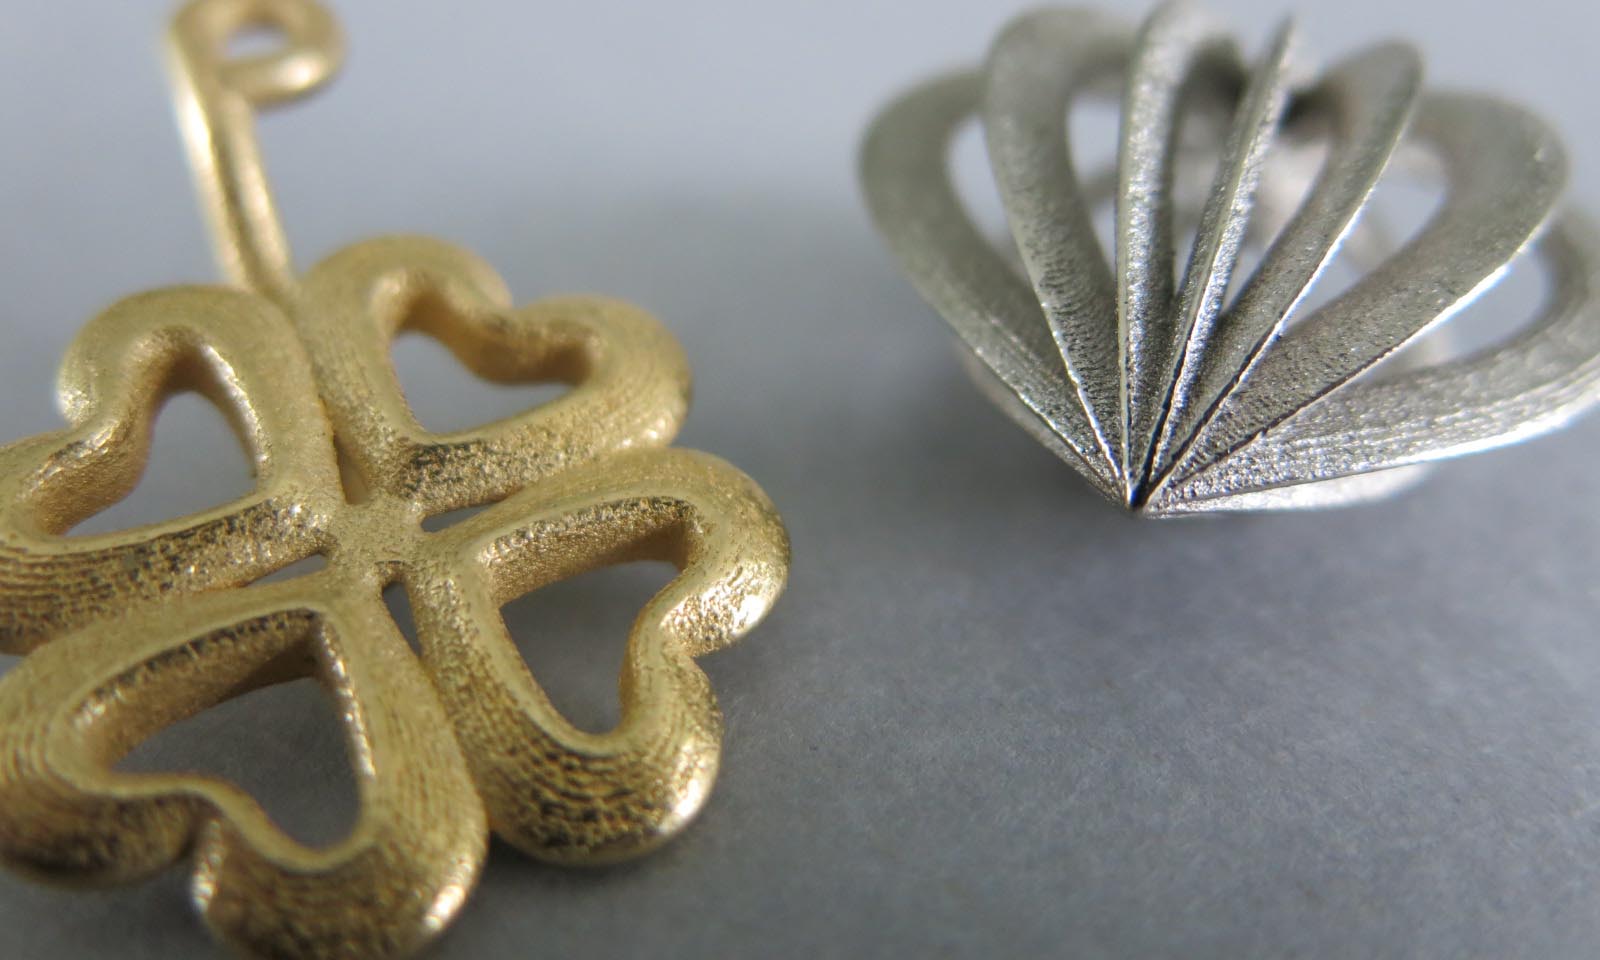 New Material Available: Binder Jetting Stainless Steel for 3D Printing | Sculpteo Blog